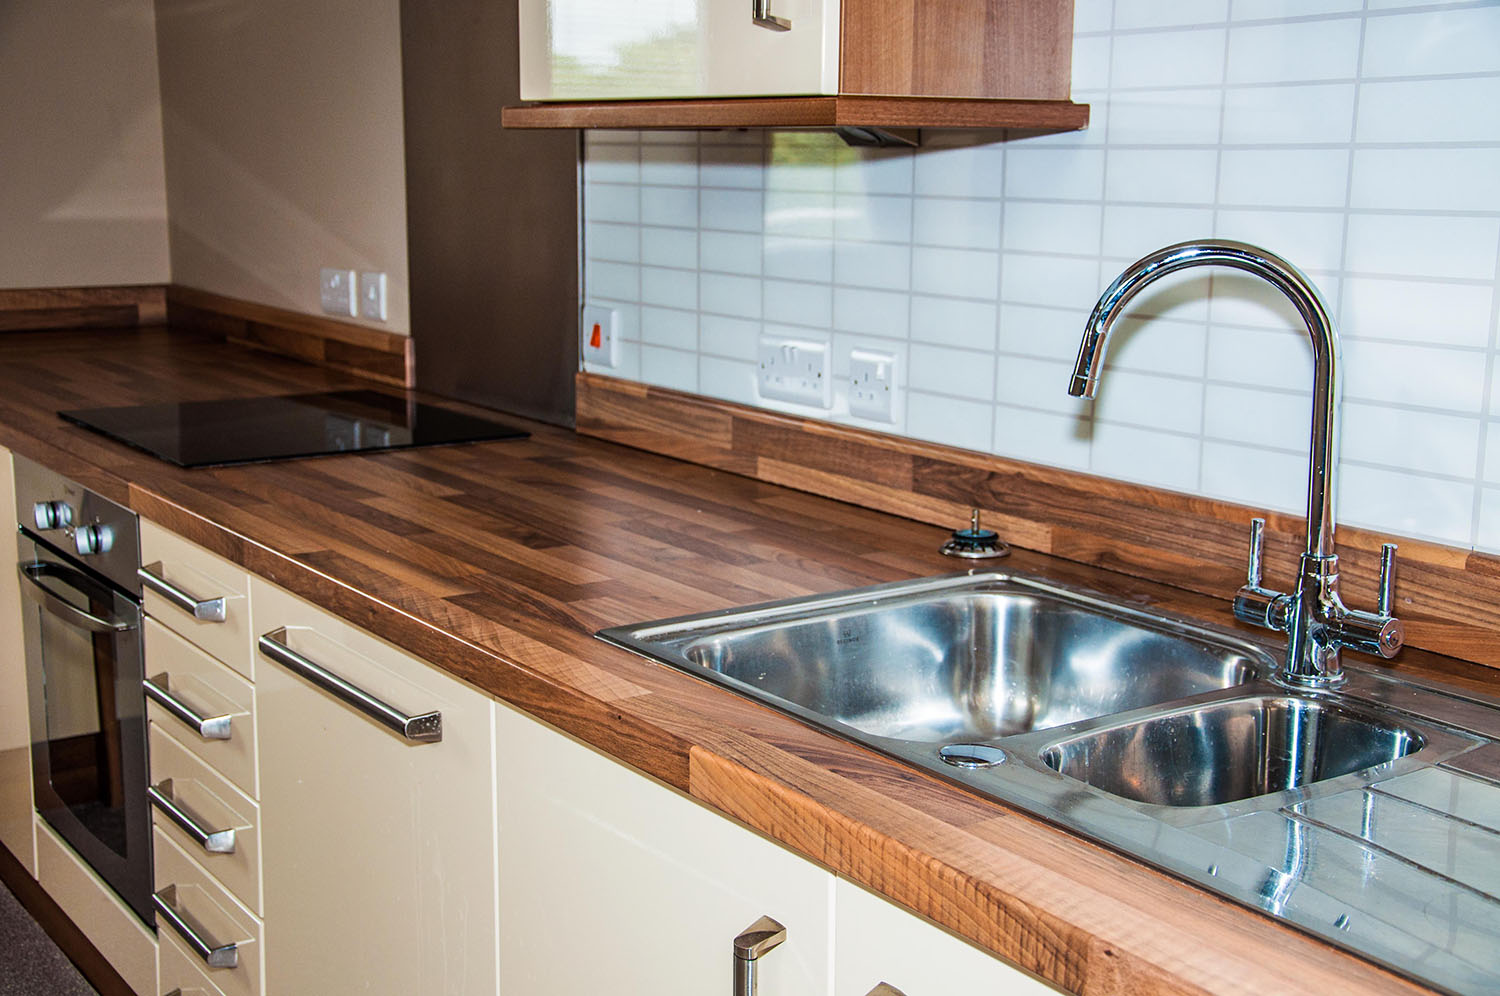 Kitchen wooden countertop with beige cupboards and a stainless steel sink and tap